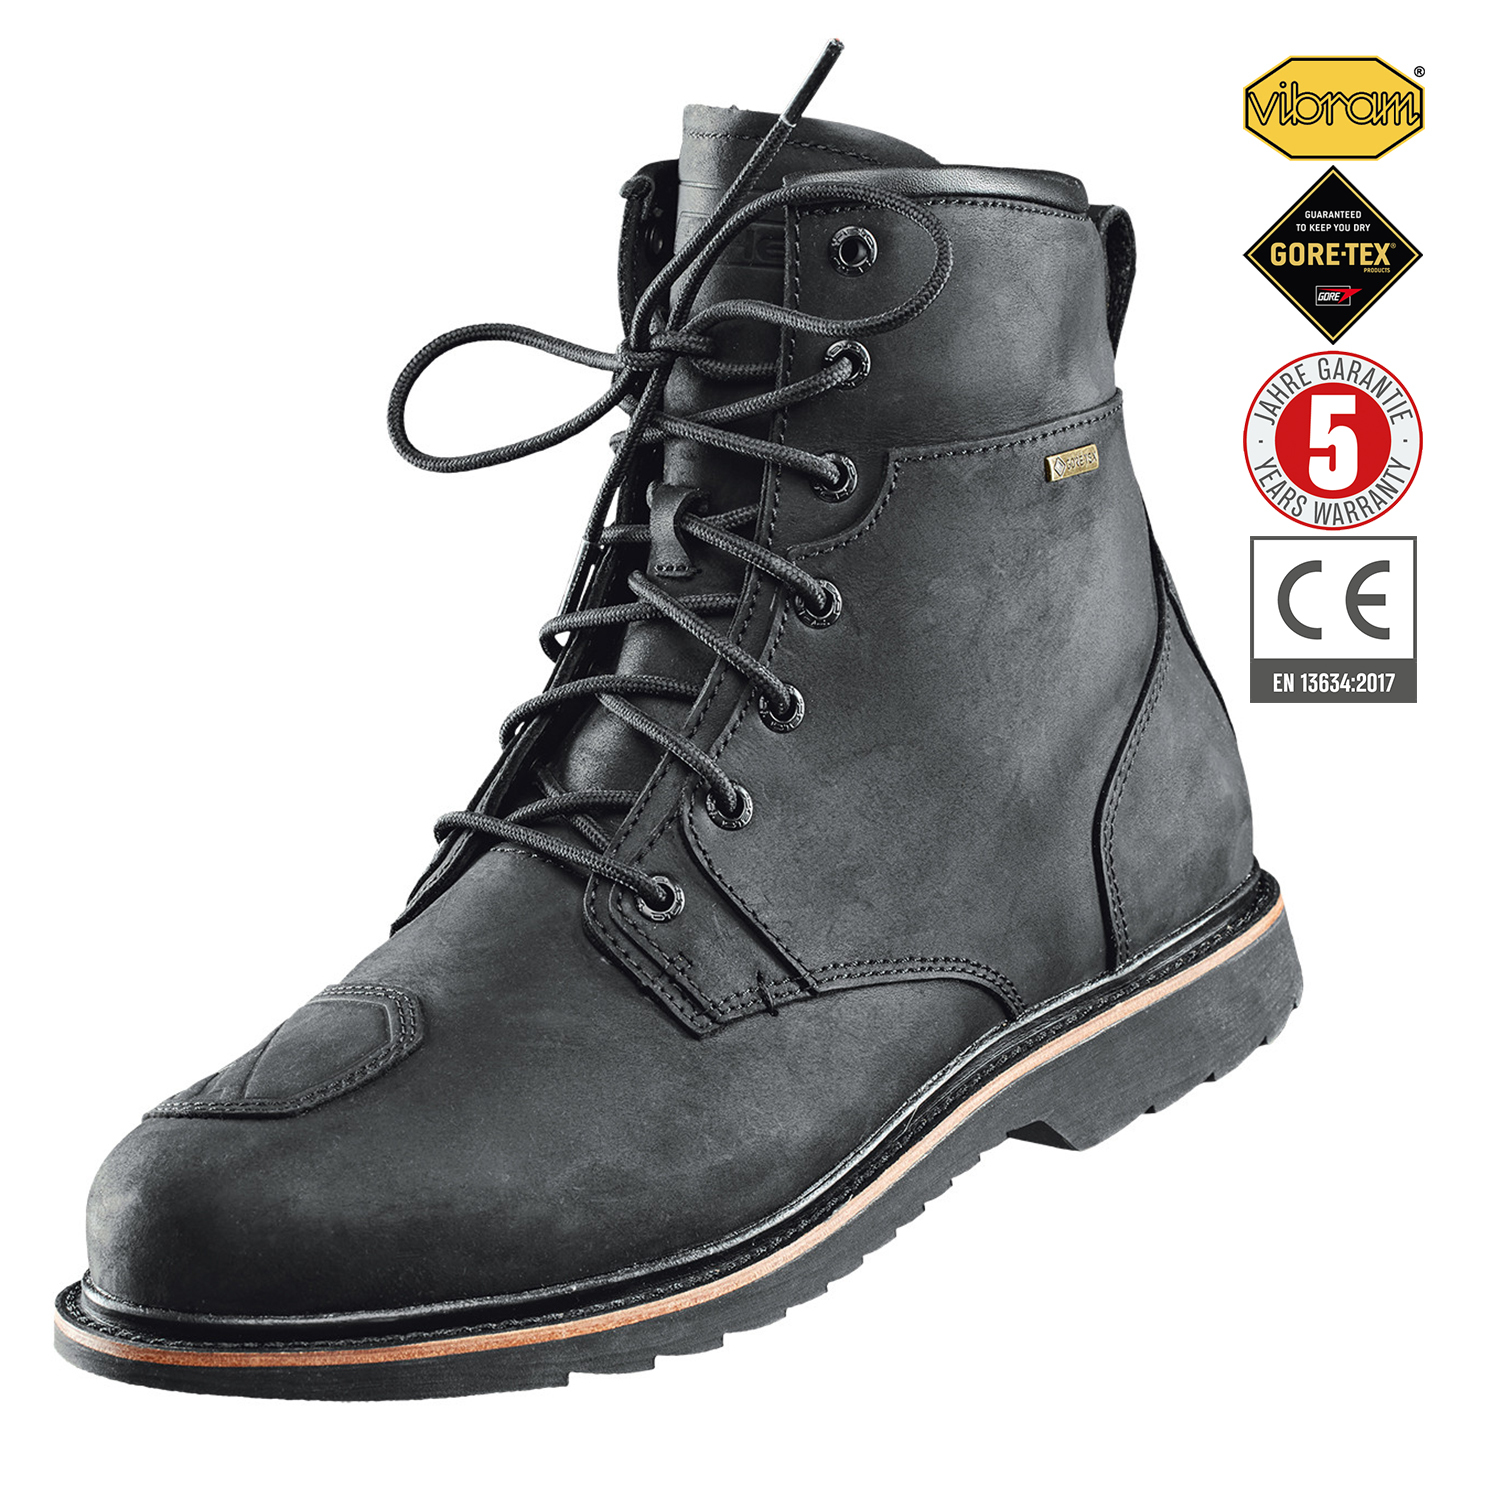 Held Saxton Gore-Tex Boots Black - Available in Various Sizes